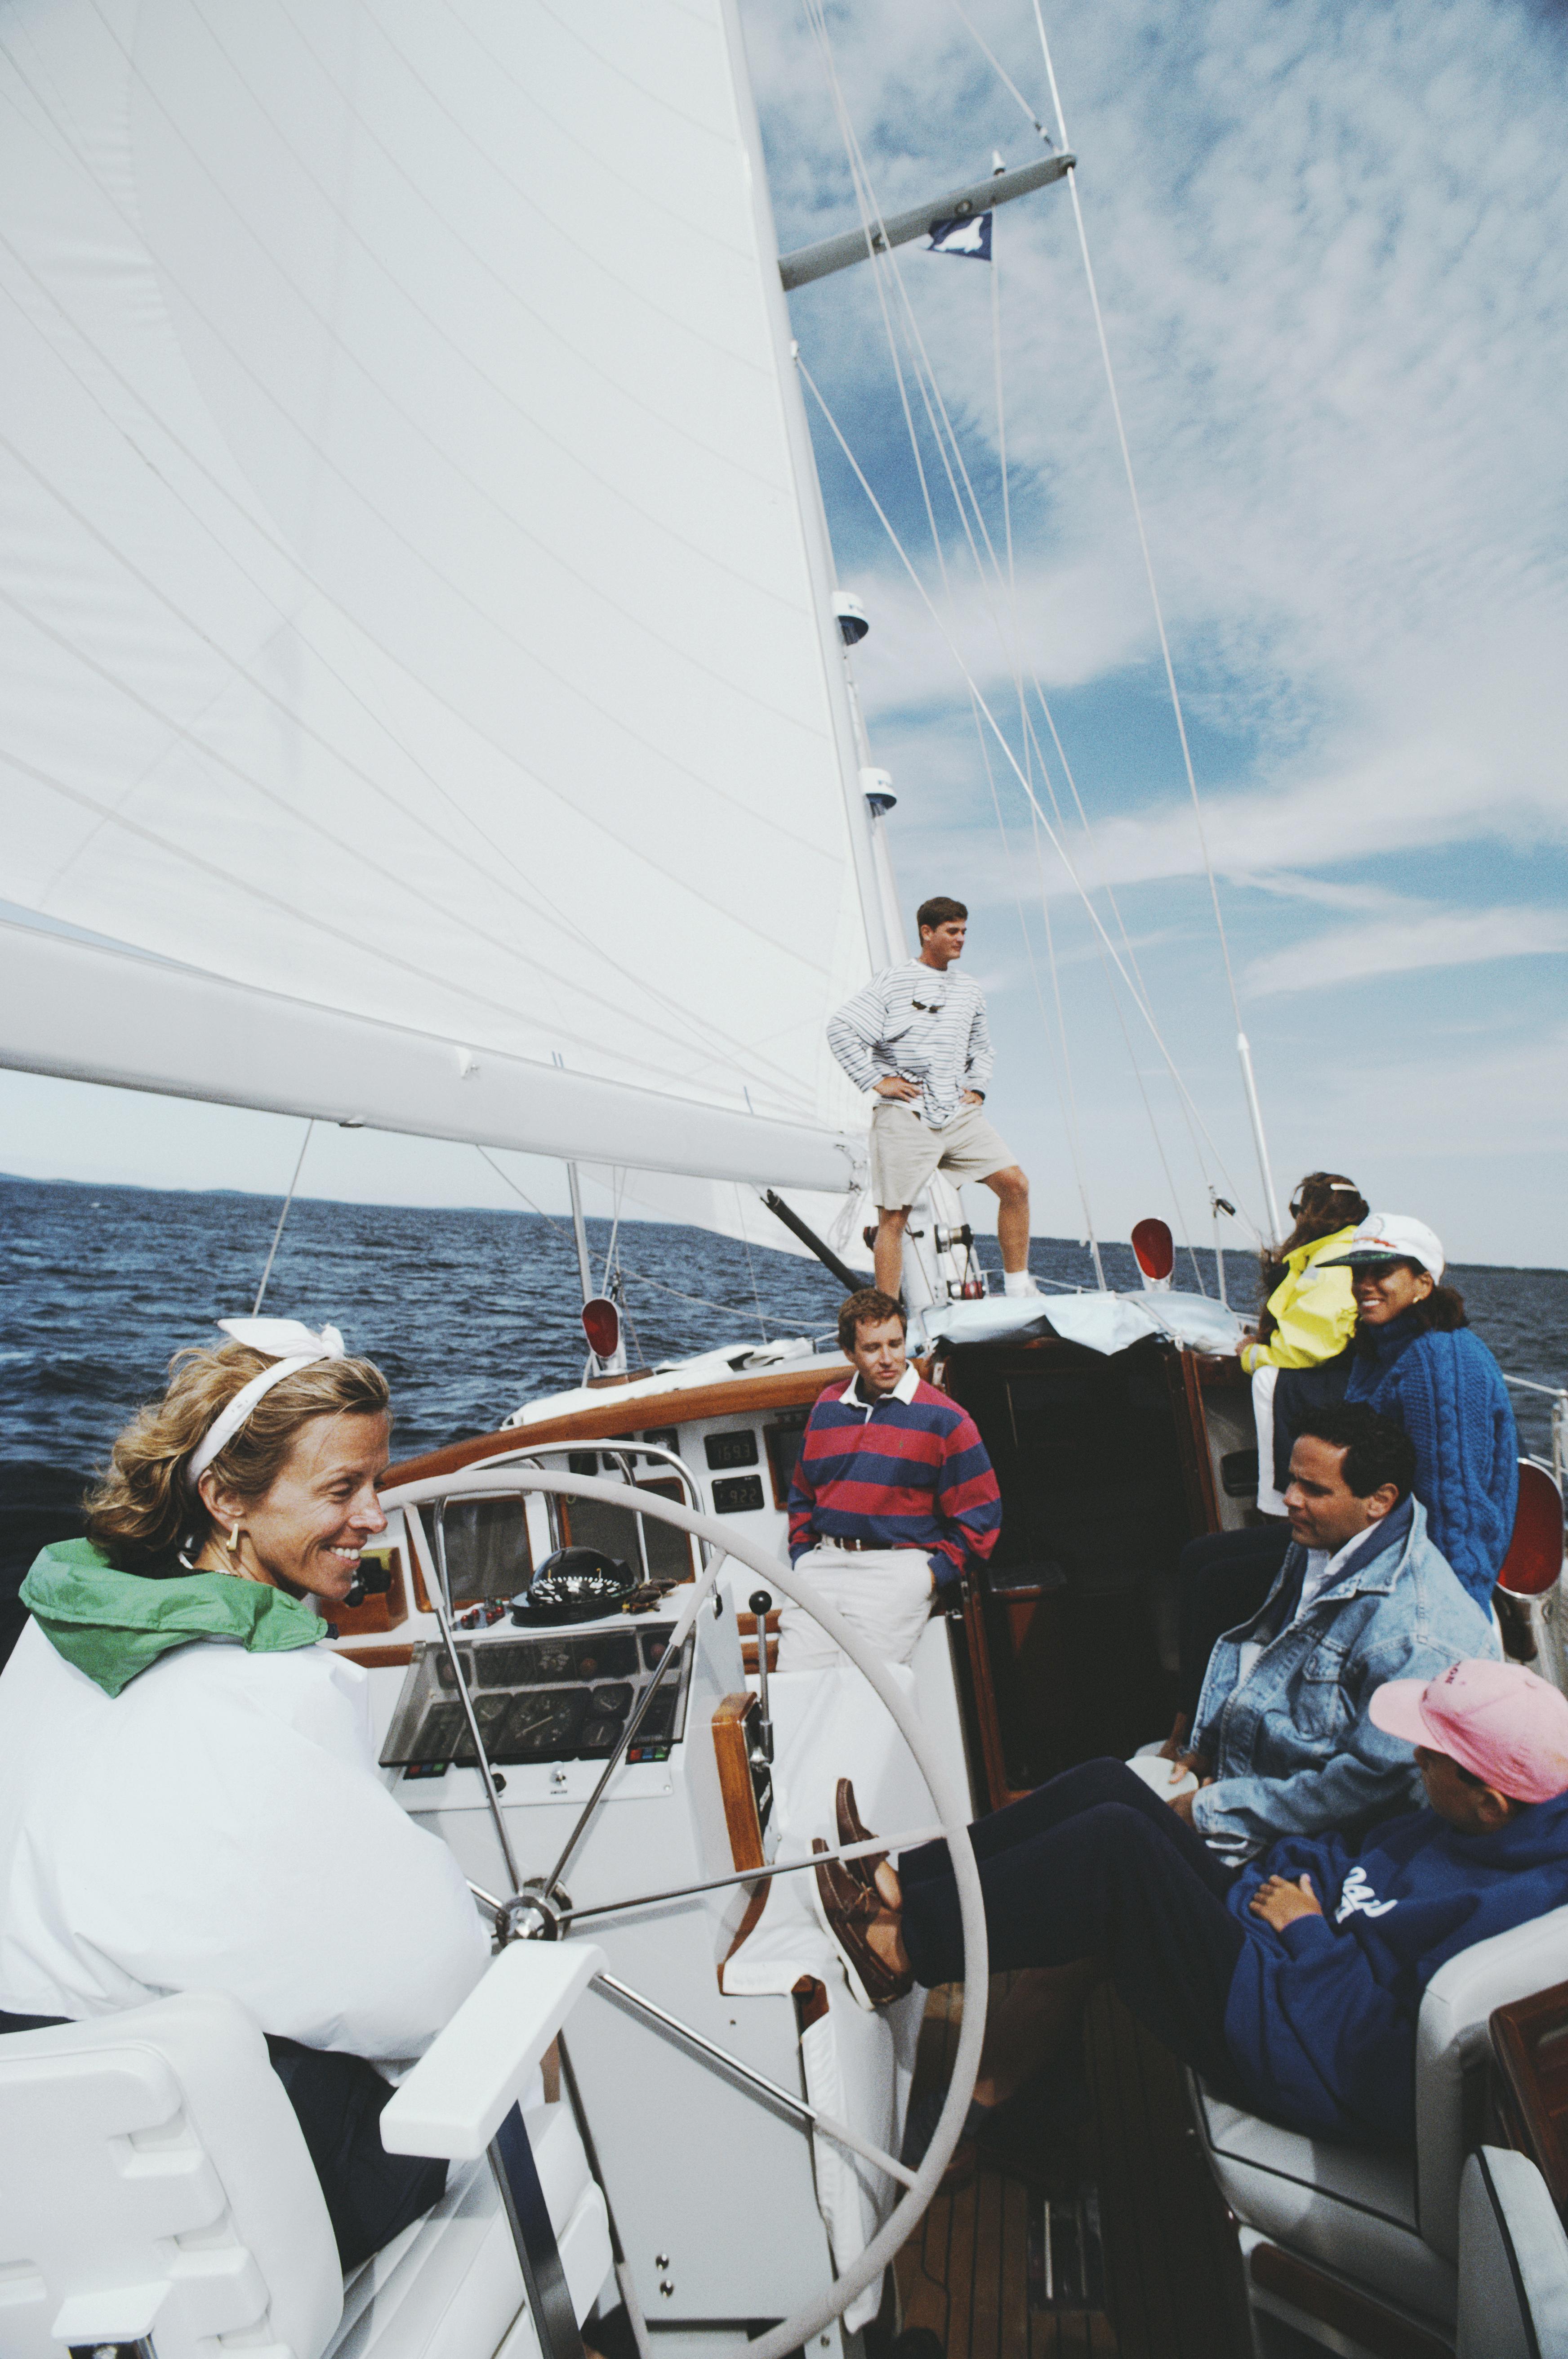 'On Board The Palawan' 1992 Slim Aarons Limited Estate Edition Print 

Olive Watson (left) takes her friends out sailing off the coast of Maine on her yacht, Palawan, 1992. On board are her nephew, Italian antiques dealer Anthony Ingrao, Viennese